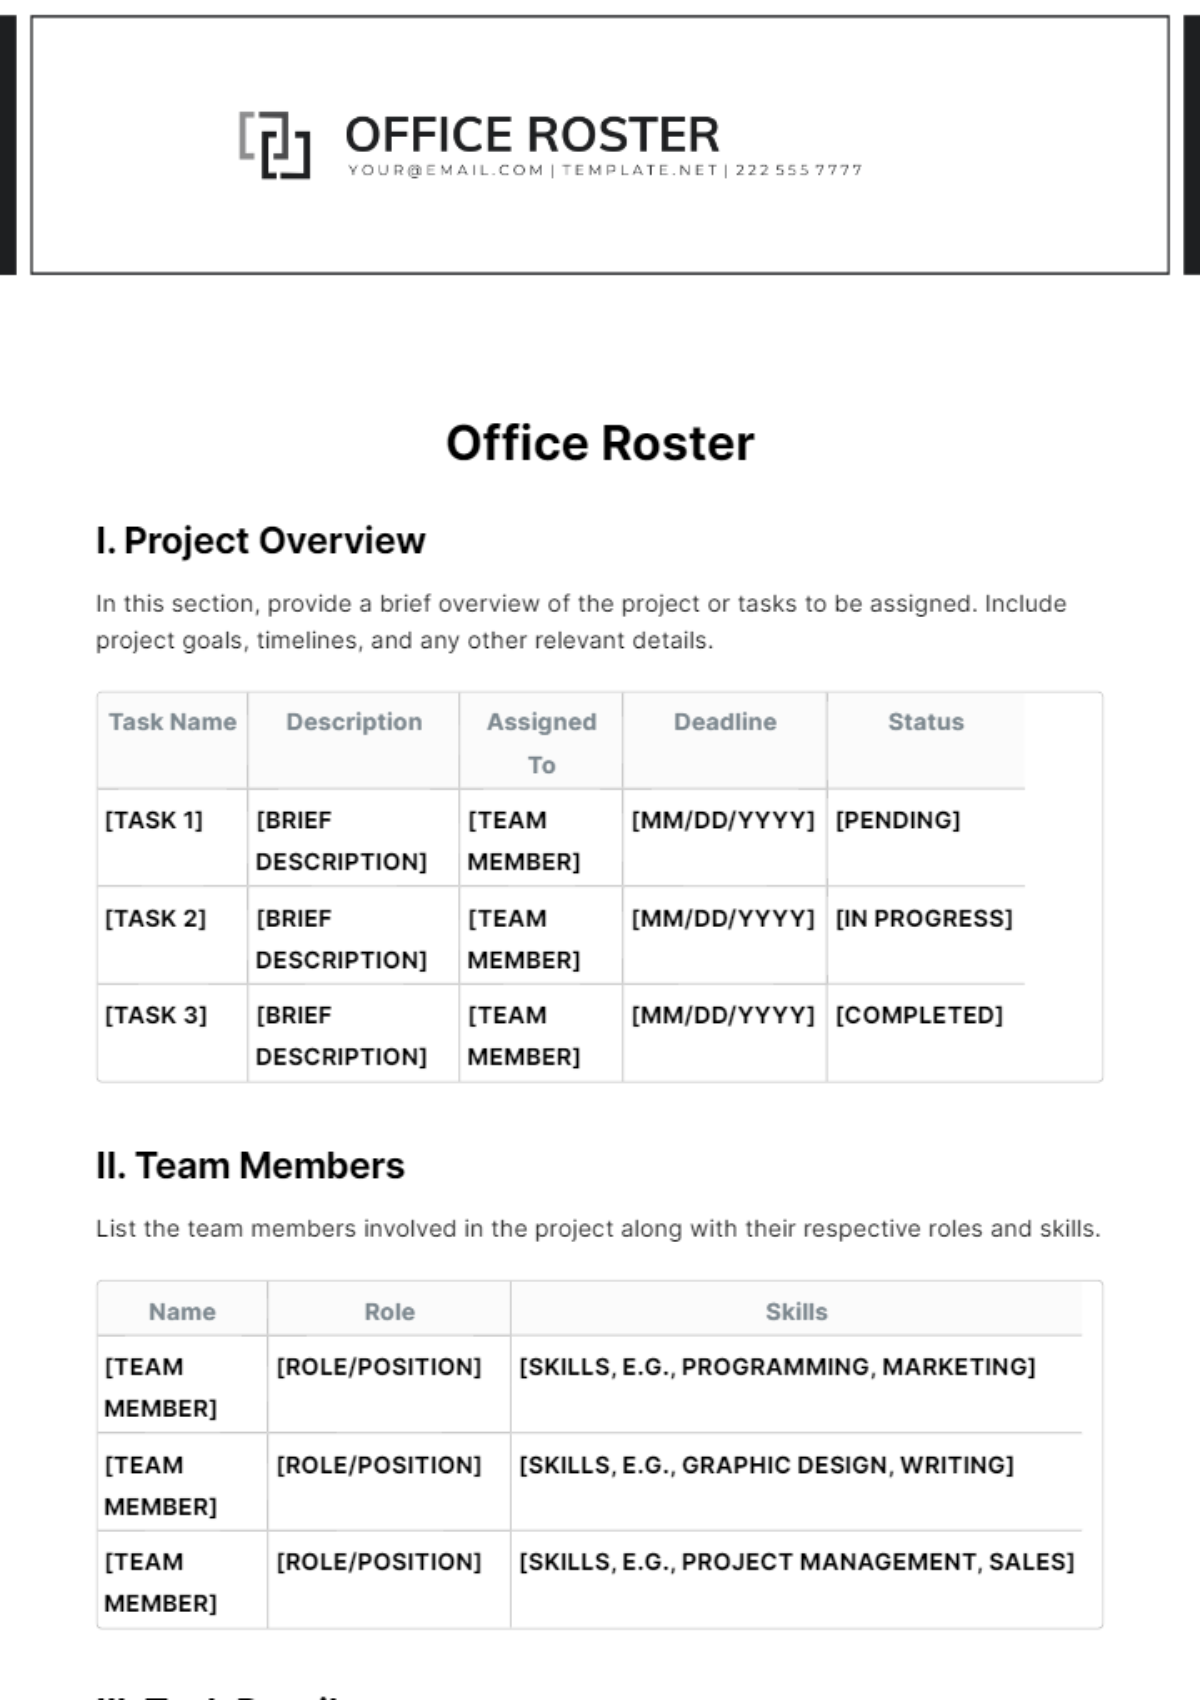 Office Roster Template